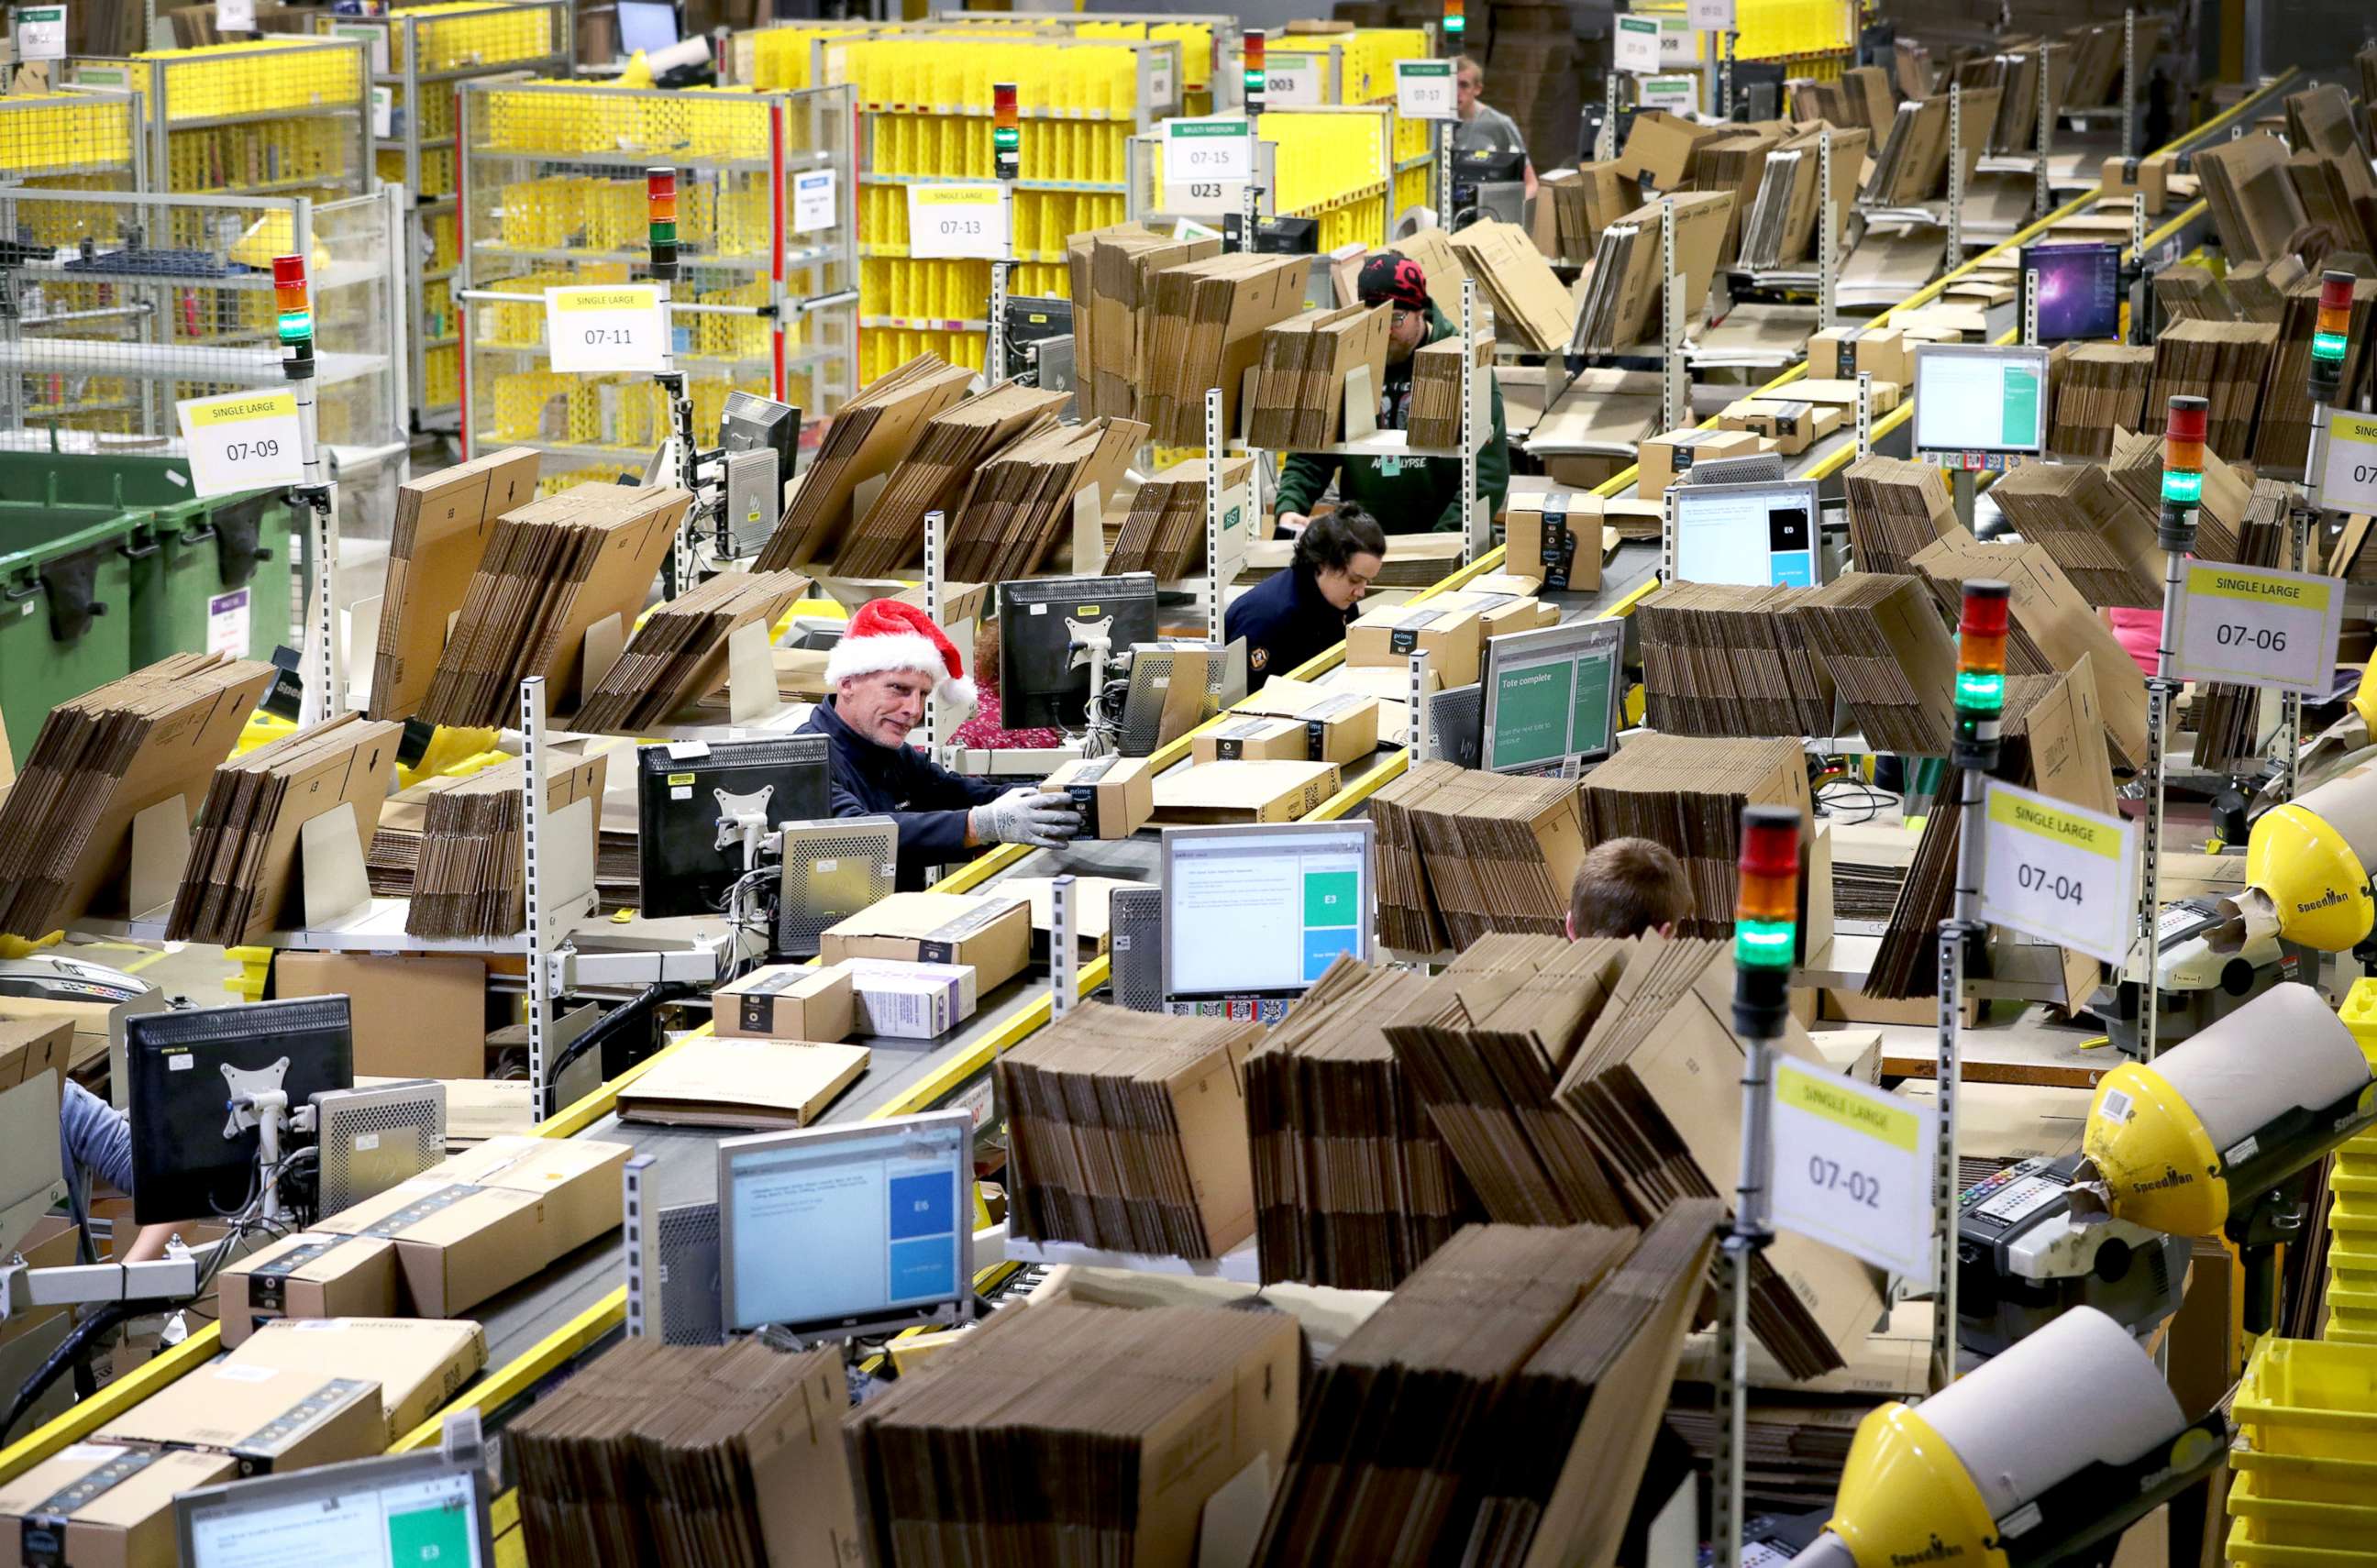 PHOTO: Staff label and package items in an Amazon fulfillment center, as the online shopping giant gears up for the Christmas rush and Black Friday sales.